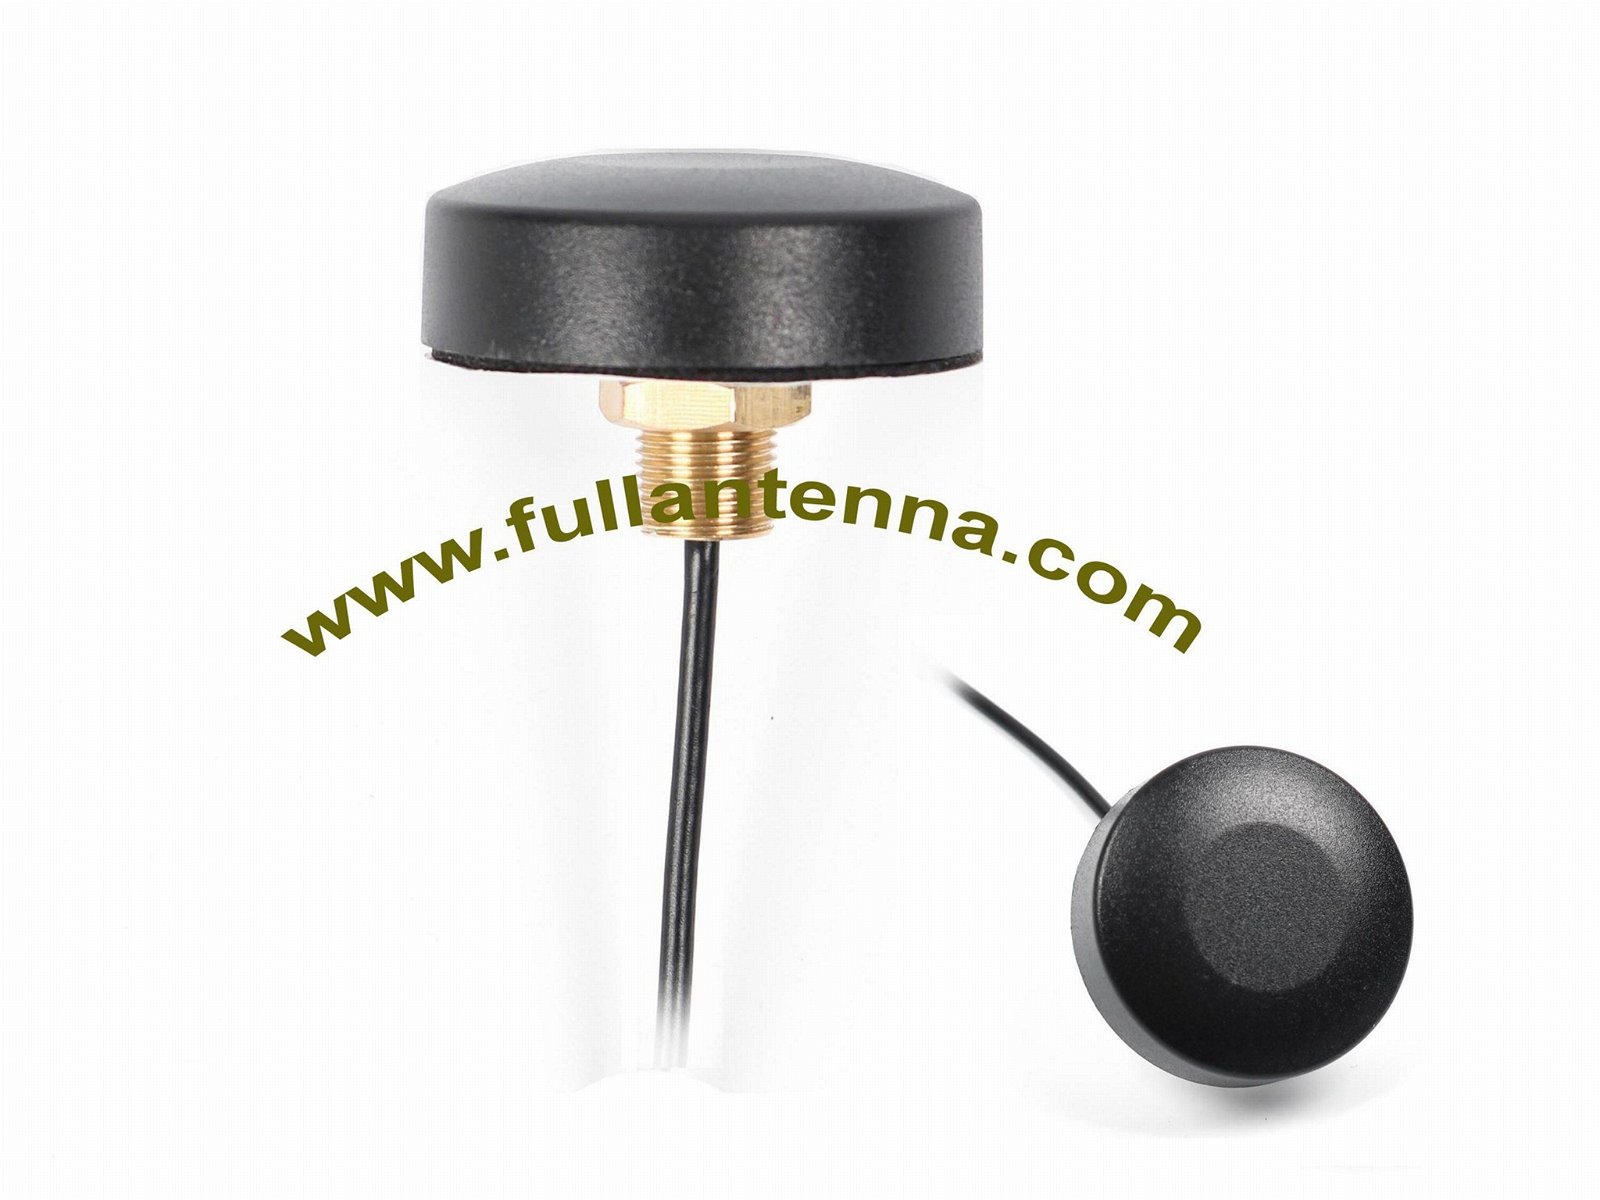 4G/LTE External Antenna,Small Size 4G Antenna With Screw Mount